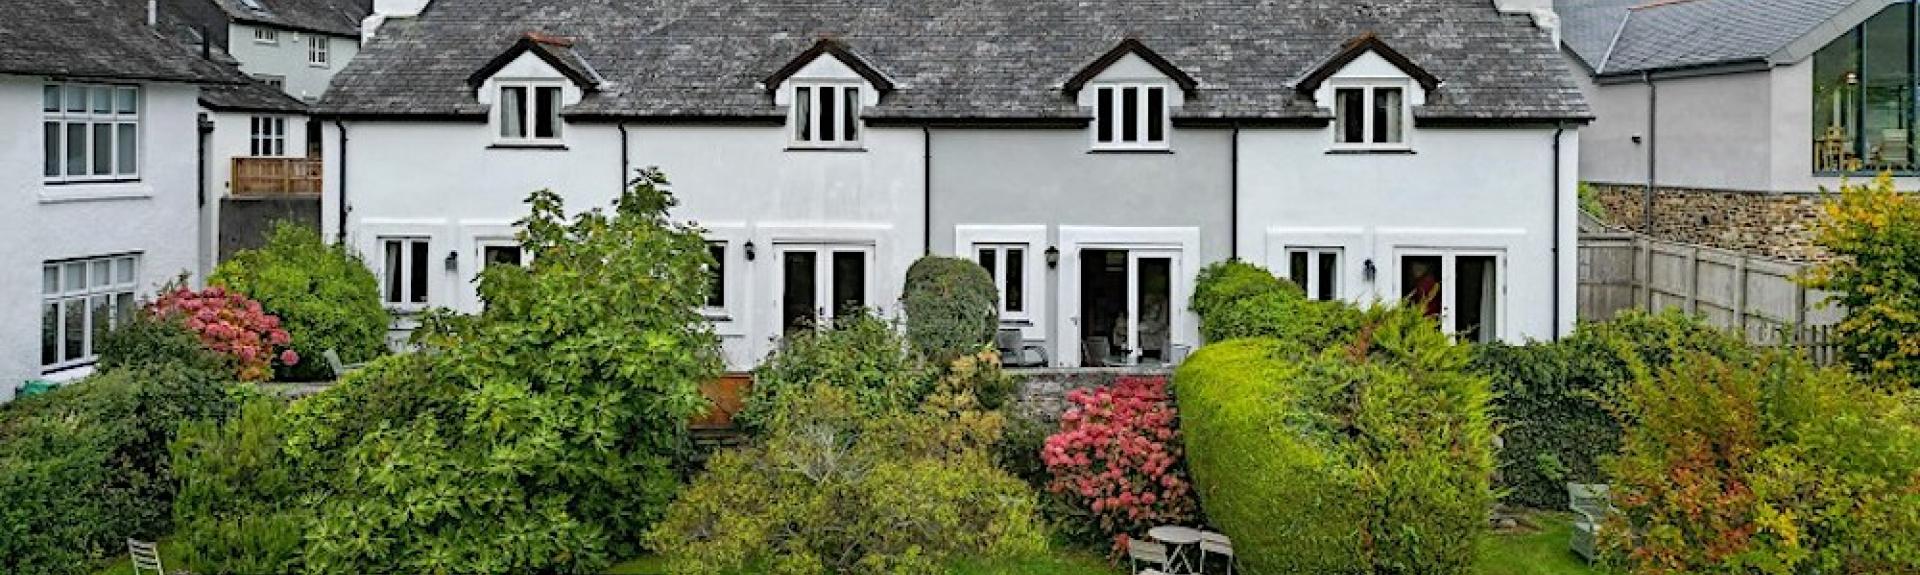 A terrace of 4 slate-roofed cottages over looking a lawn with tall shrubs and an open field in Dittisham. 